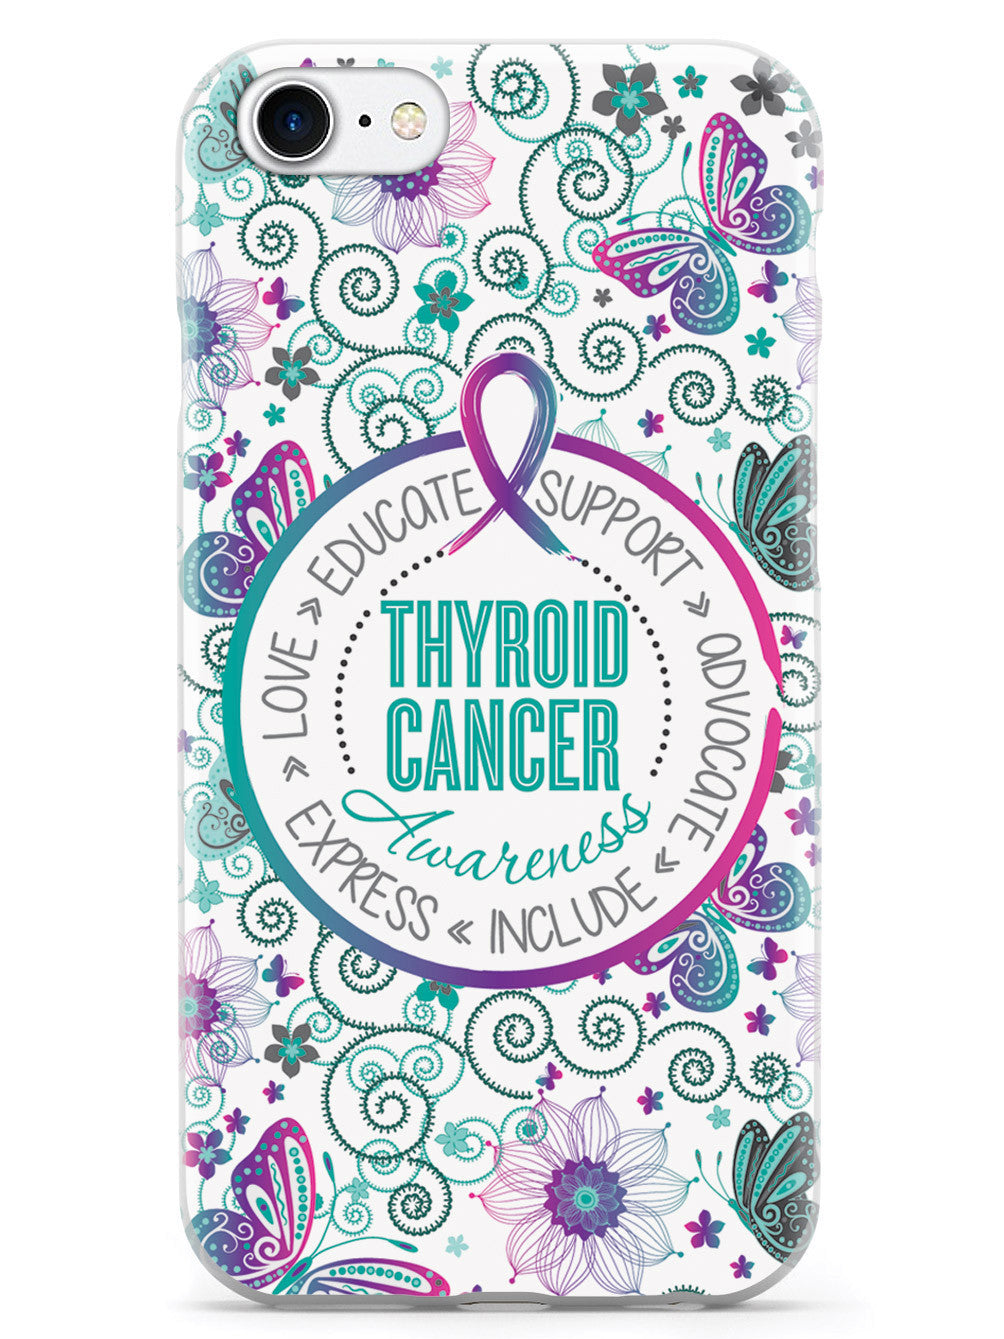 Thyroid Cancer - Butterfly Pattern Case